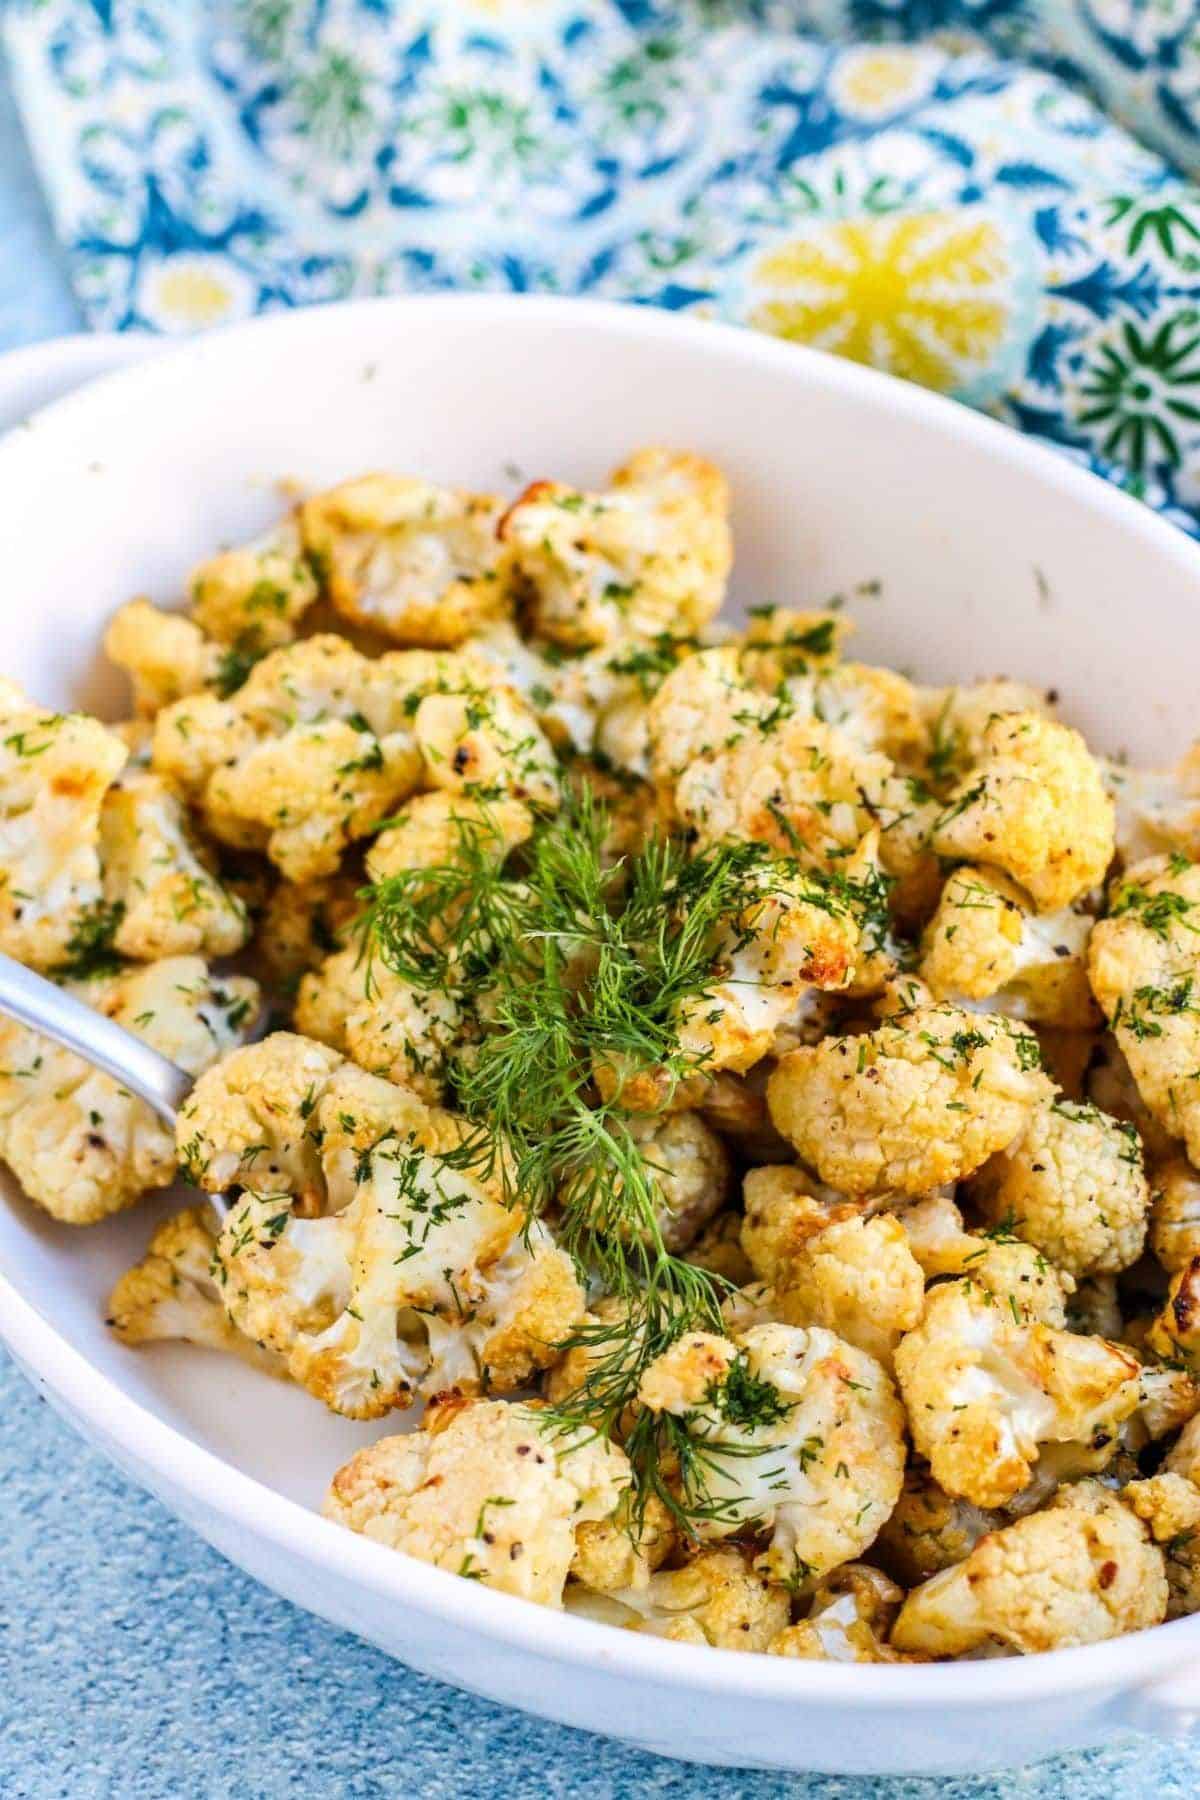 Dill and Garlic Roasted Cauliflower in a white bowl.